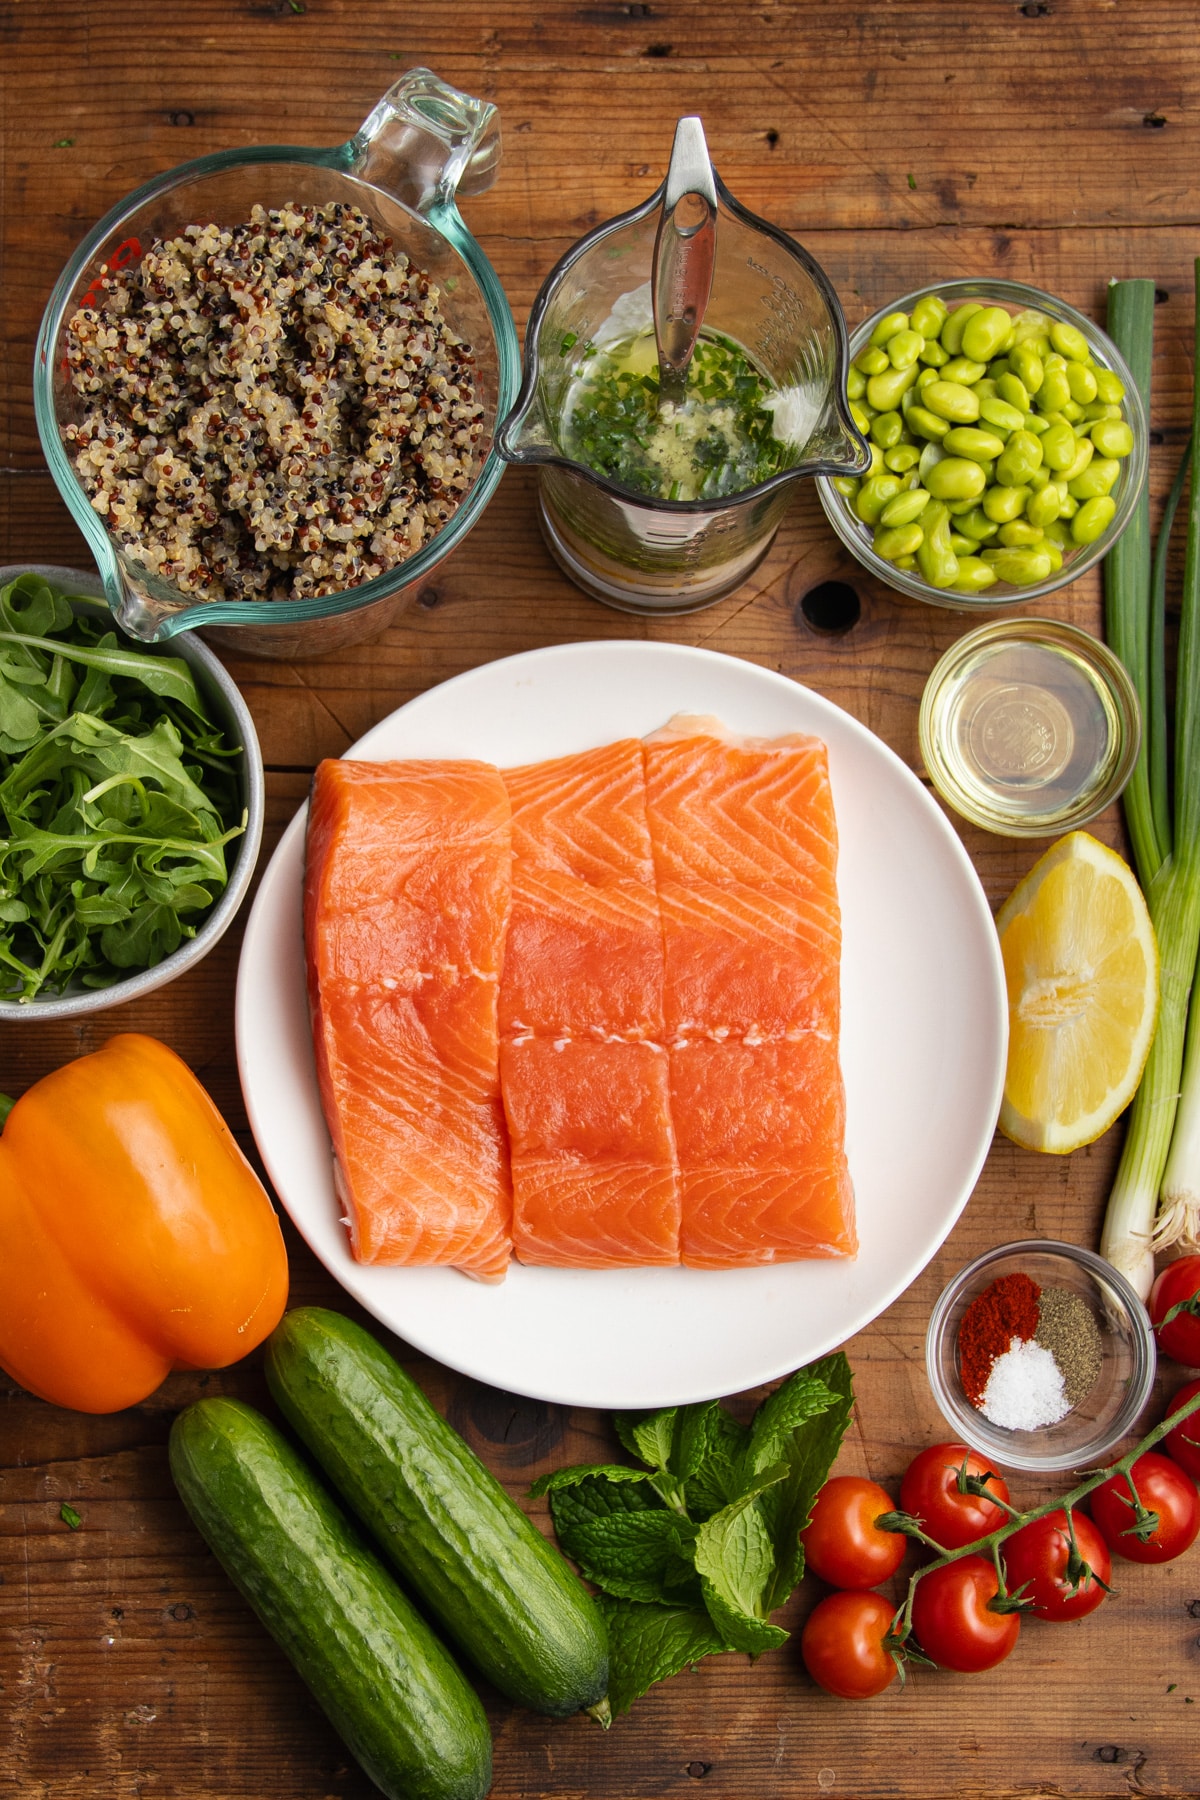 This is a picture of all the ingredients needed to make this salmon salad.